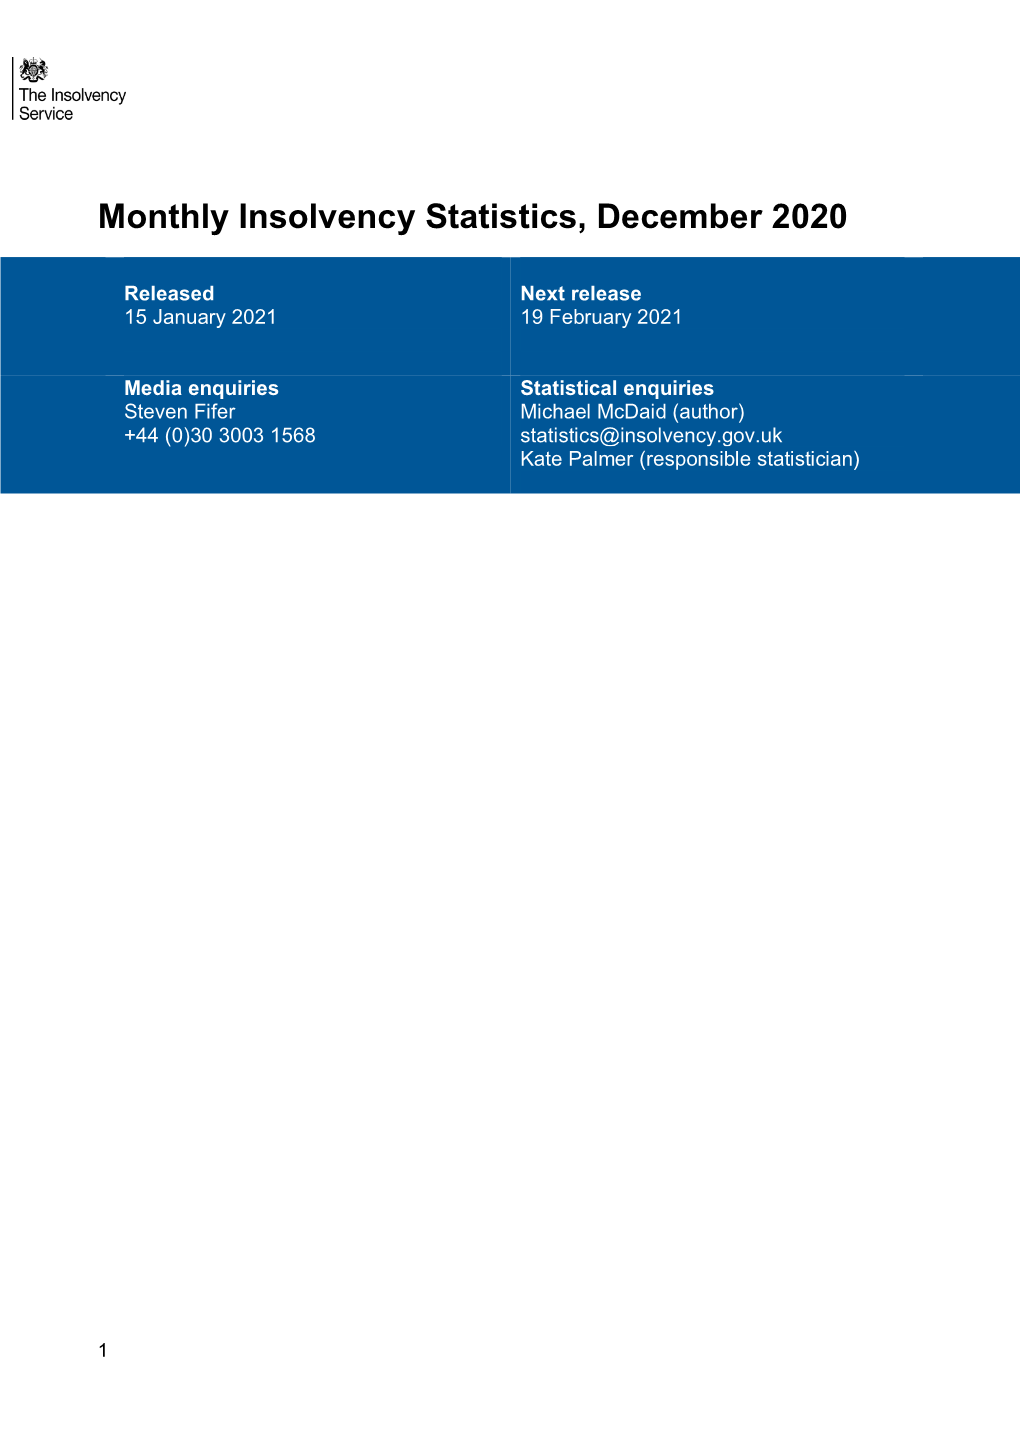 Monthly Insolvency Statistics, December 2020